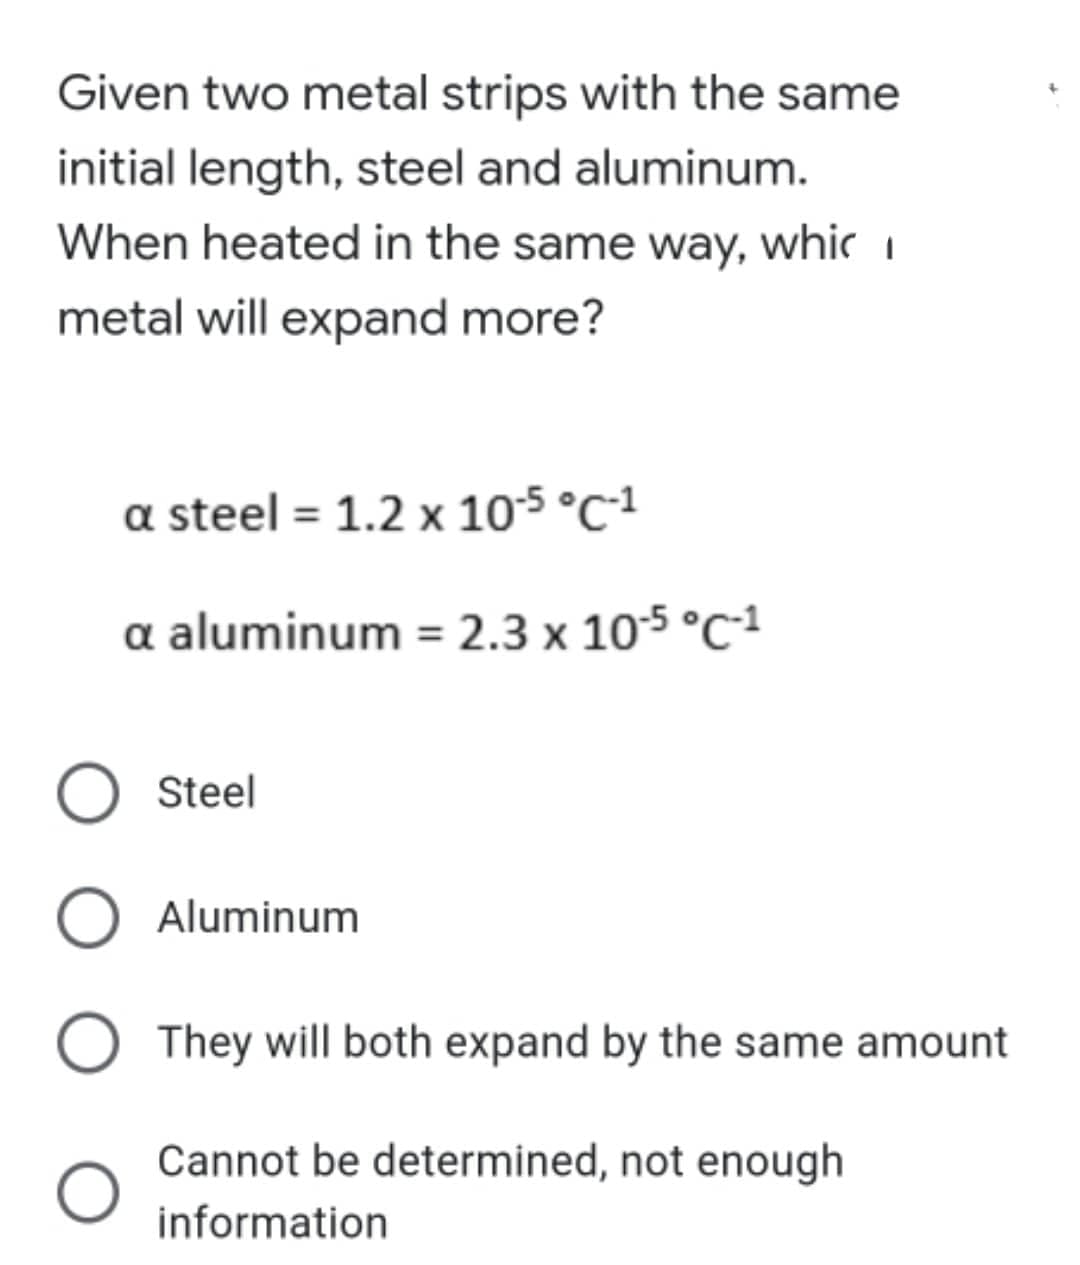 Given two metal strips with the same
initial length, steel and aluminum.
When heated in the same way, whic
metal will expand more?
a steel = 1.2 x 10-5 °C-1
a aluminum = 2.3 x 10-5 °C-1
Aluminum
They will both expand by the same amount
Cannot be determined, not enough
information
O Steel